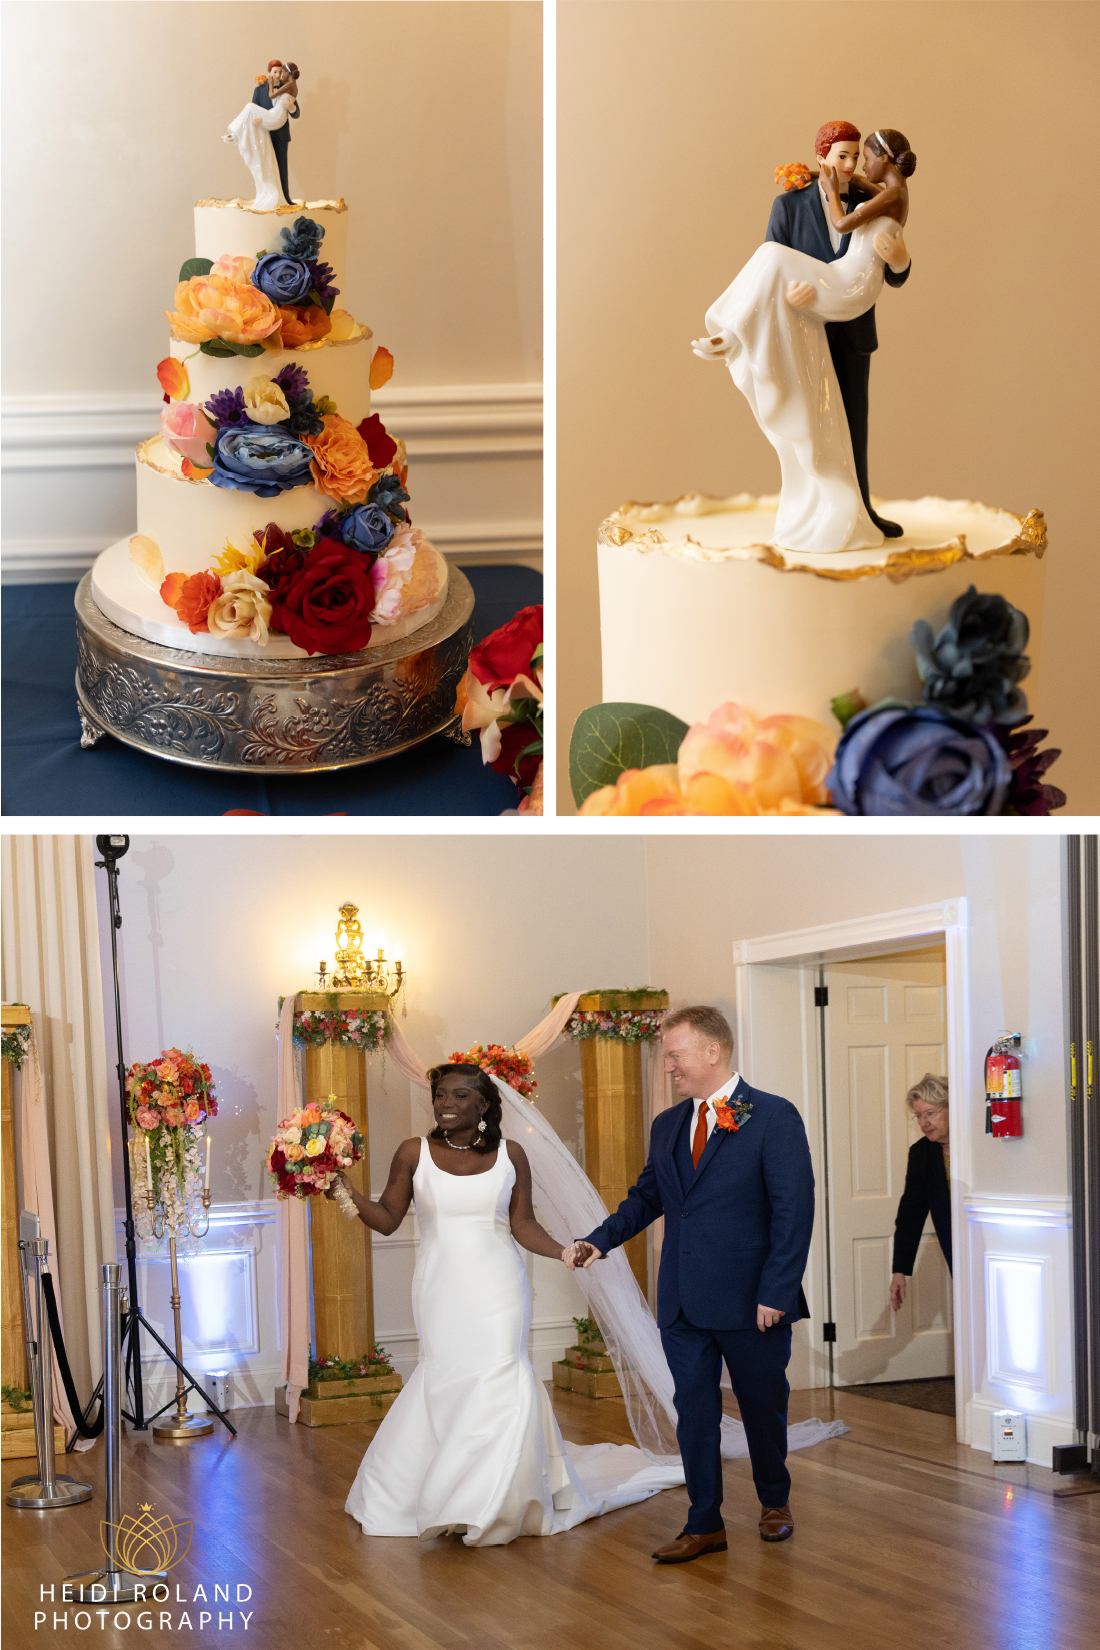 wedding cake and bride and groom entrance into reception in University and Whist Club Wedding 